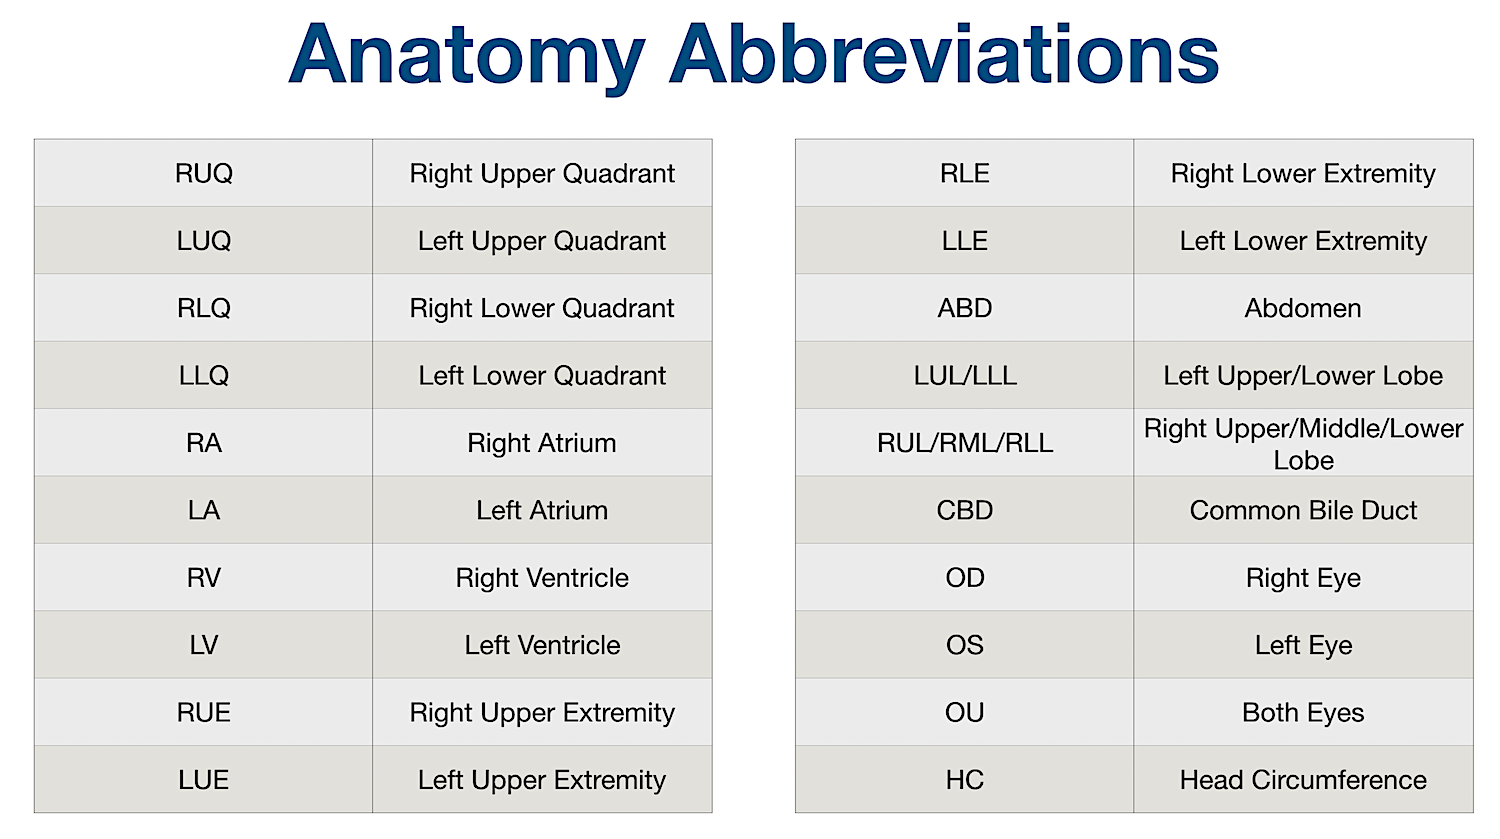 ASDAS Abbreviations, Full Forms, Meanings and Definitions